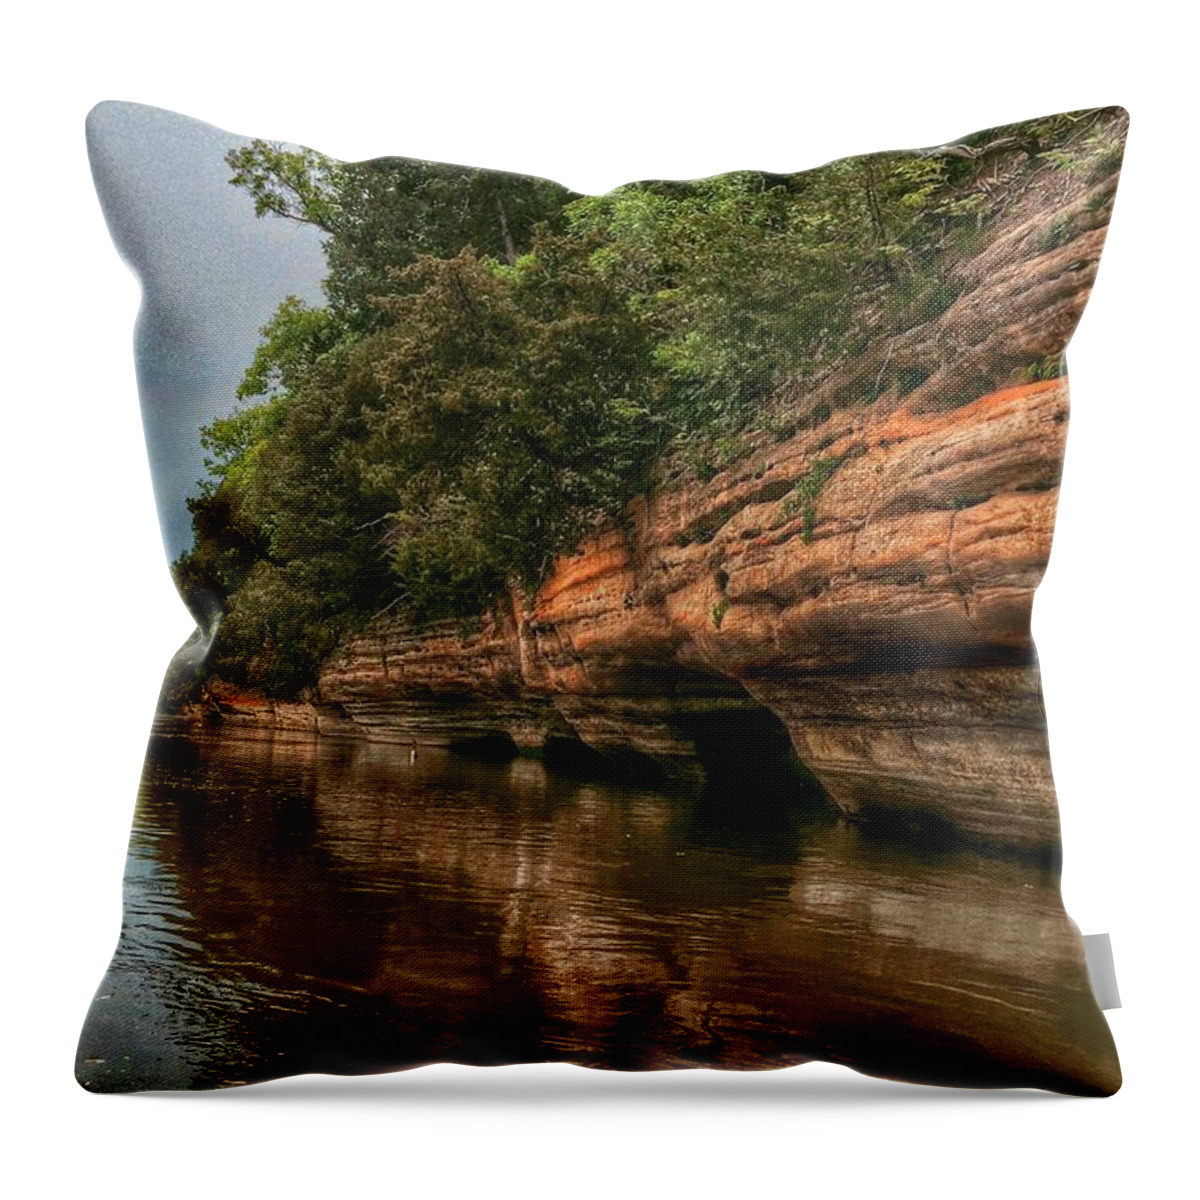 River Throw Pillow featuring the photograph Fox River Sandstone Cliffs by Nick Heap